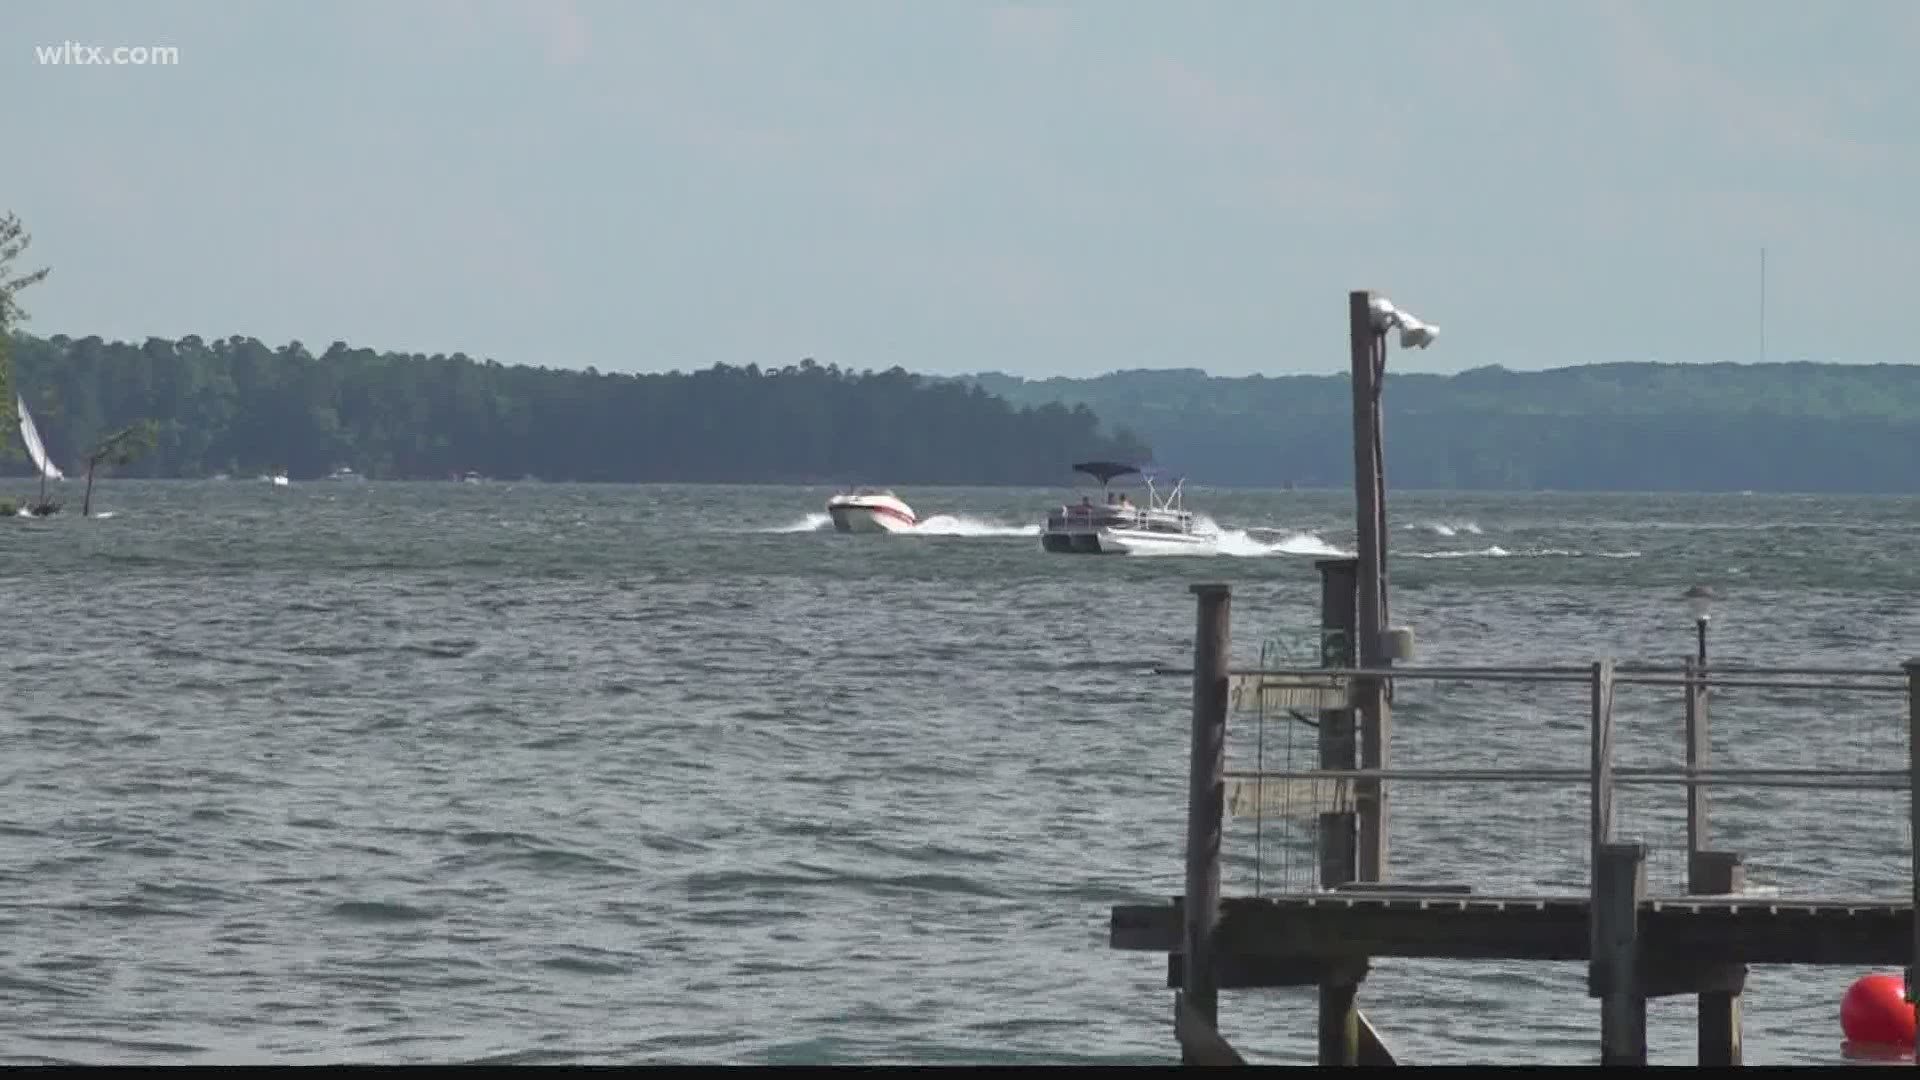 Five people are injured after a boat crash where one boat was damaged and the other sank on Lake Murray